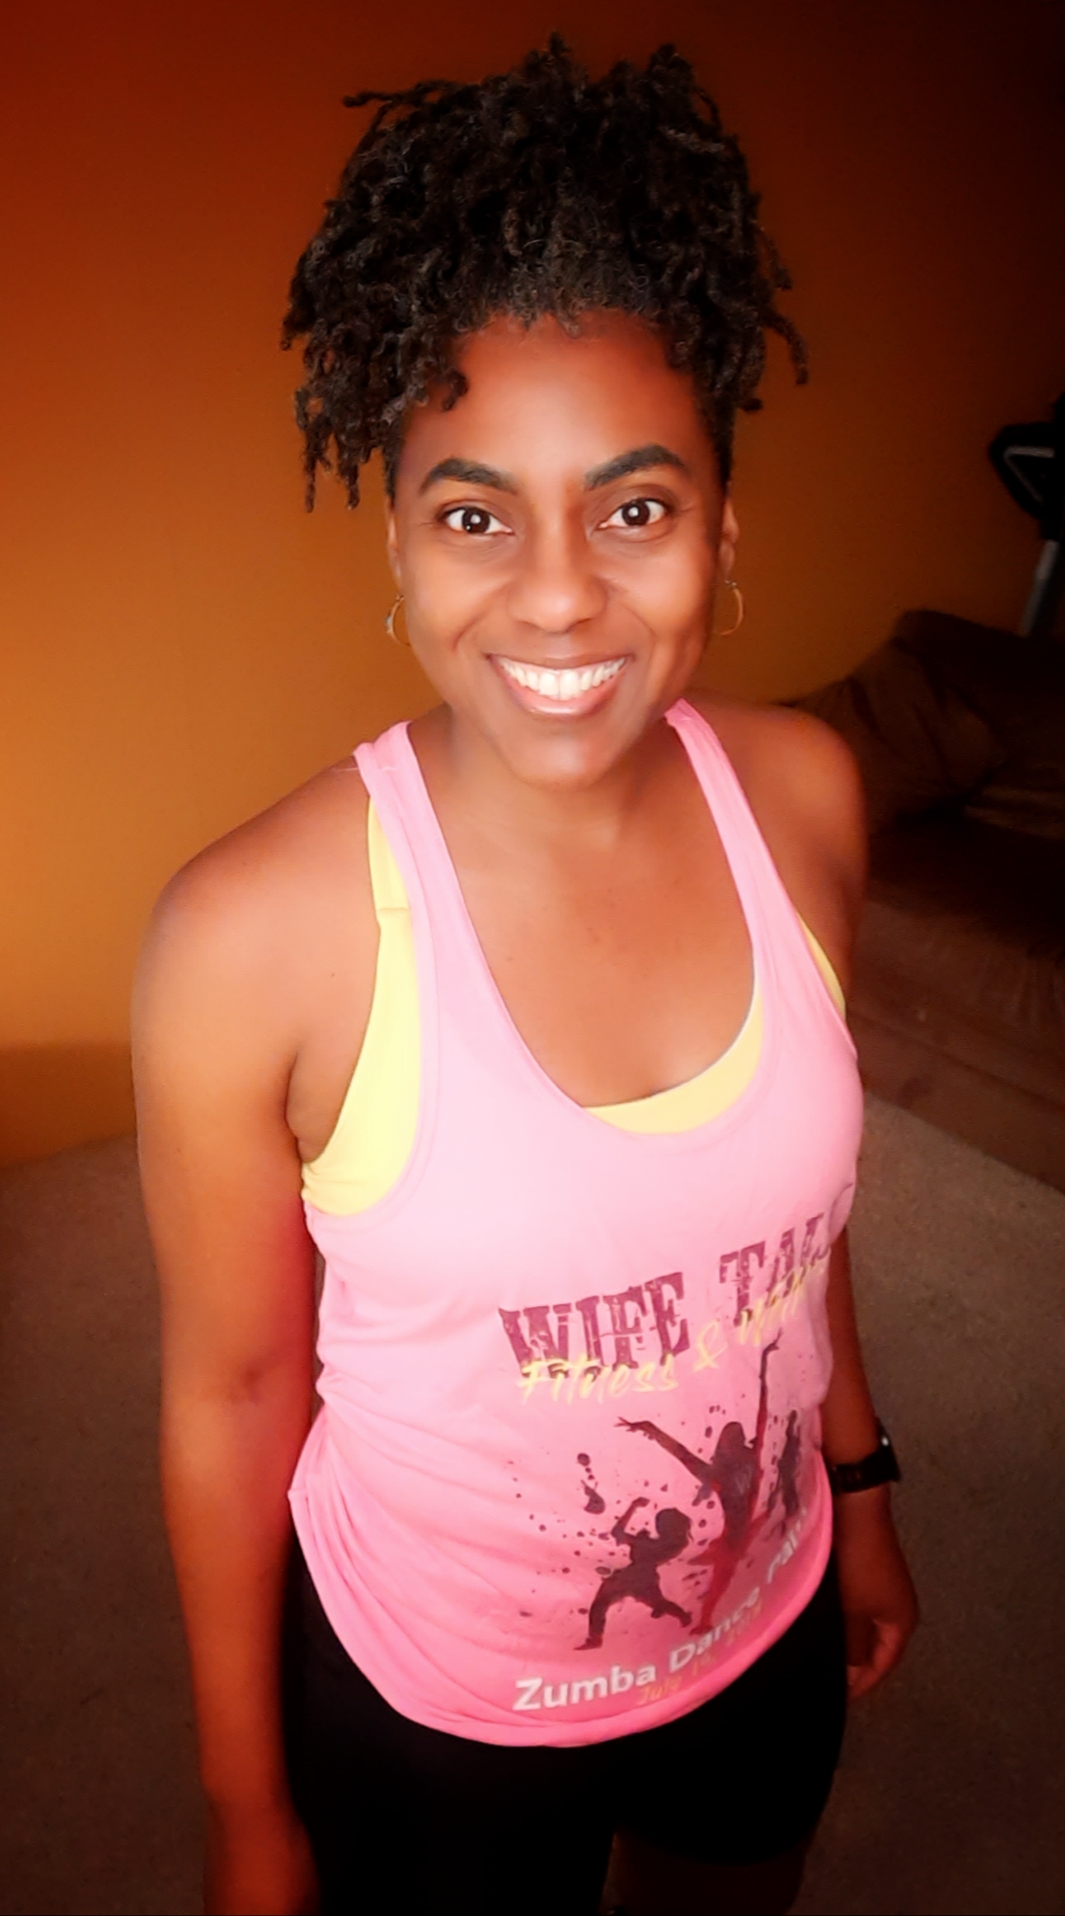 "I'm committed to being an advocate for women's health and helping to fight breast cancer is one of the things on the top of my list. Working out, eating healthy, and campaigning for the cause are only few ways I can contribute. Just completed a morning workout and will be rewarding myself with a superfood smoothie. #SOFightPink"-Tiki Merritt-Curry, Senior Records & Info Mgt Specialist / Records & Info Mgmt